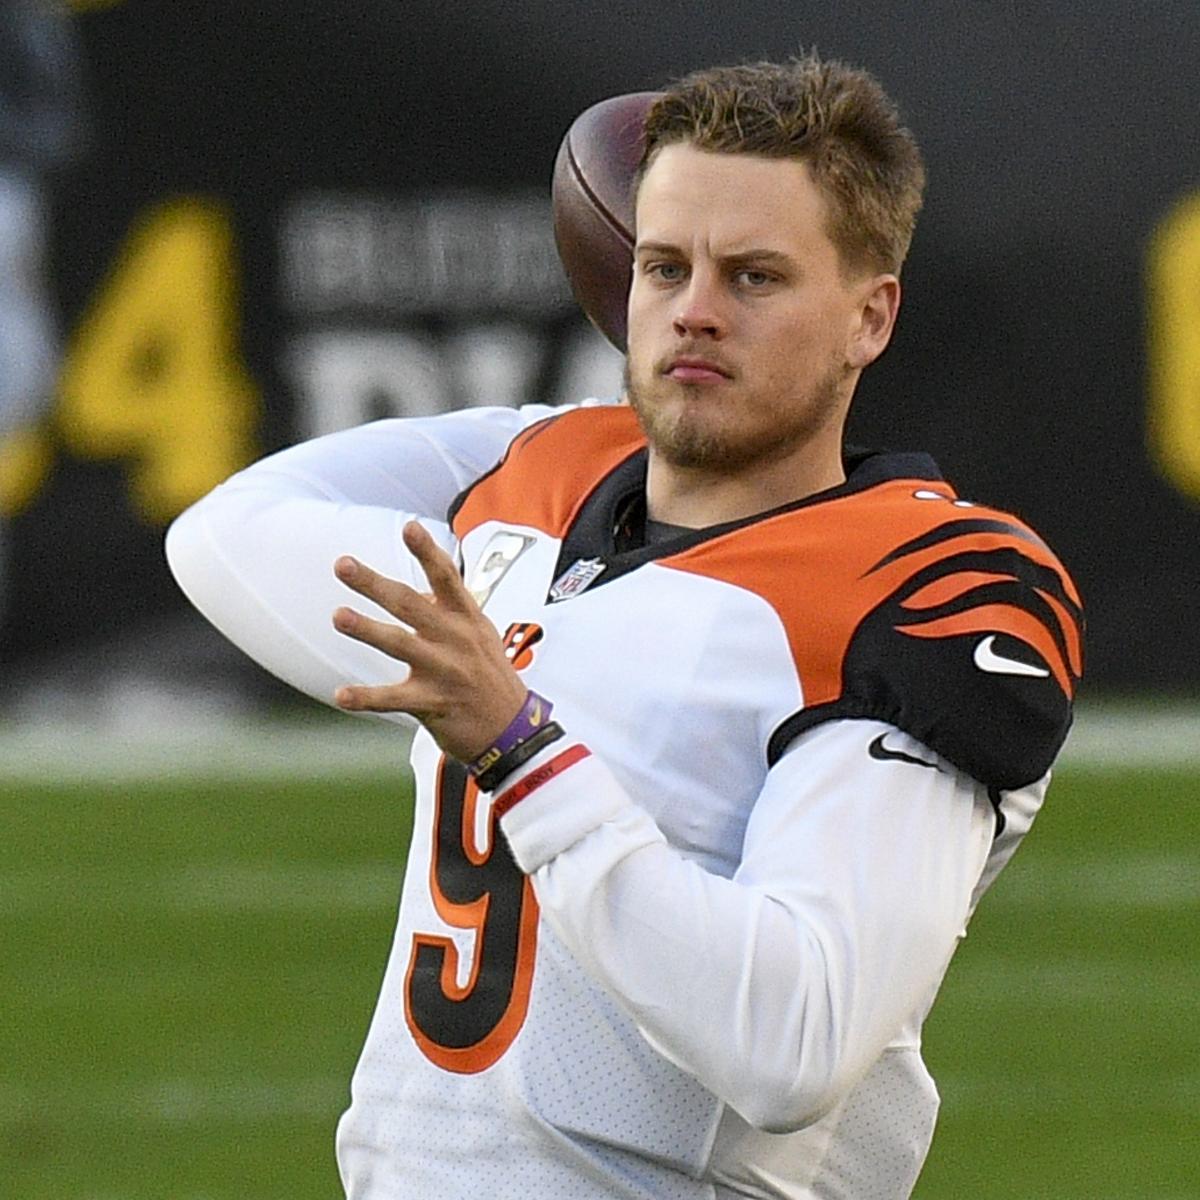 Joe Burrow 'I Think I'll Be Ready' to Play Week 1 for Bengals After